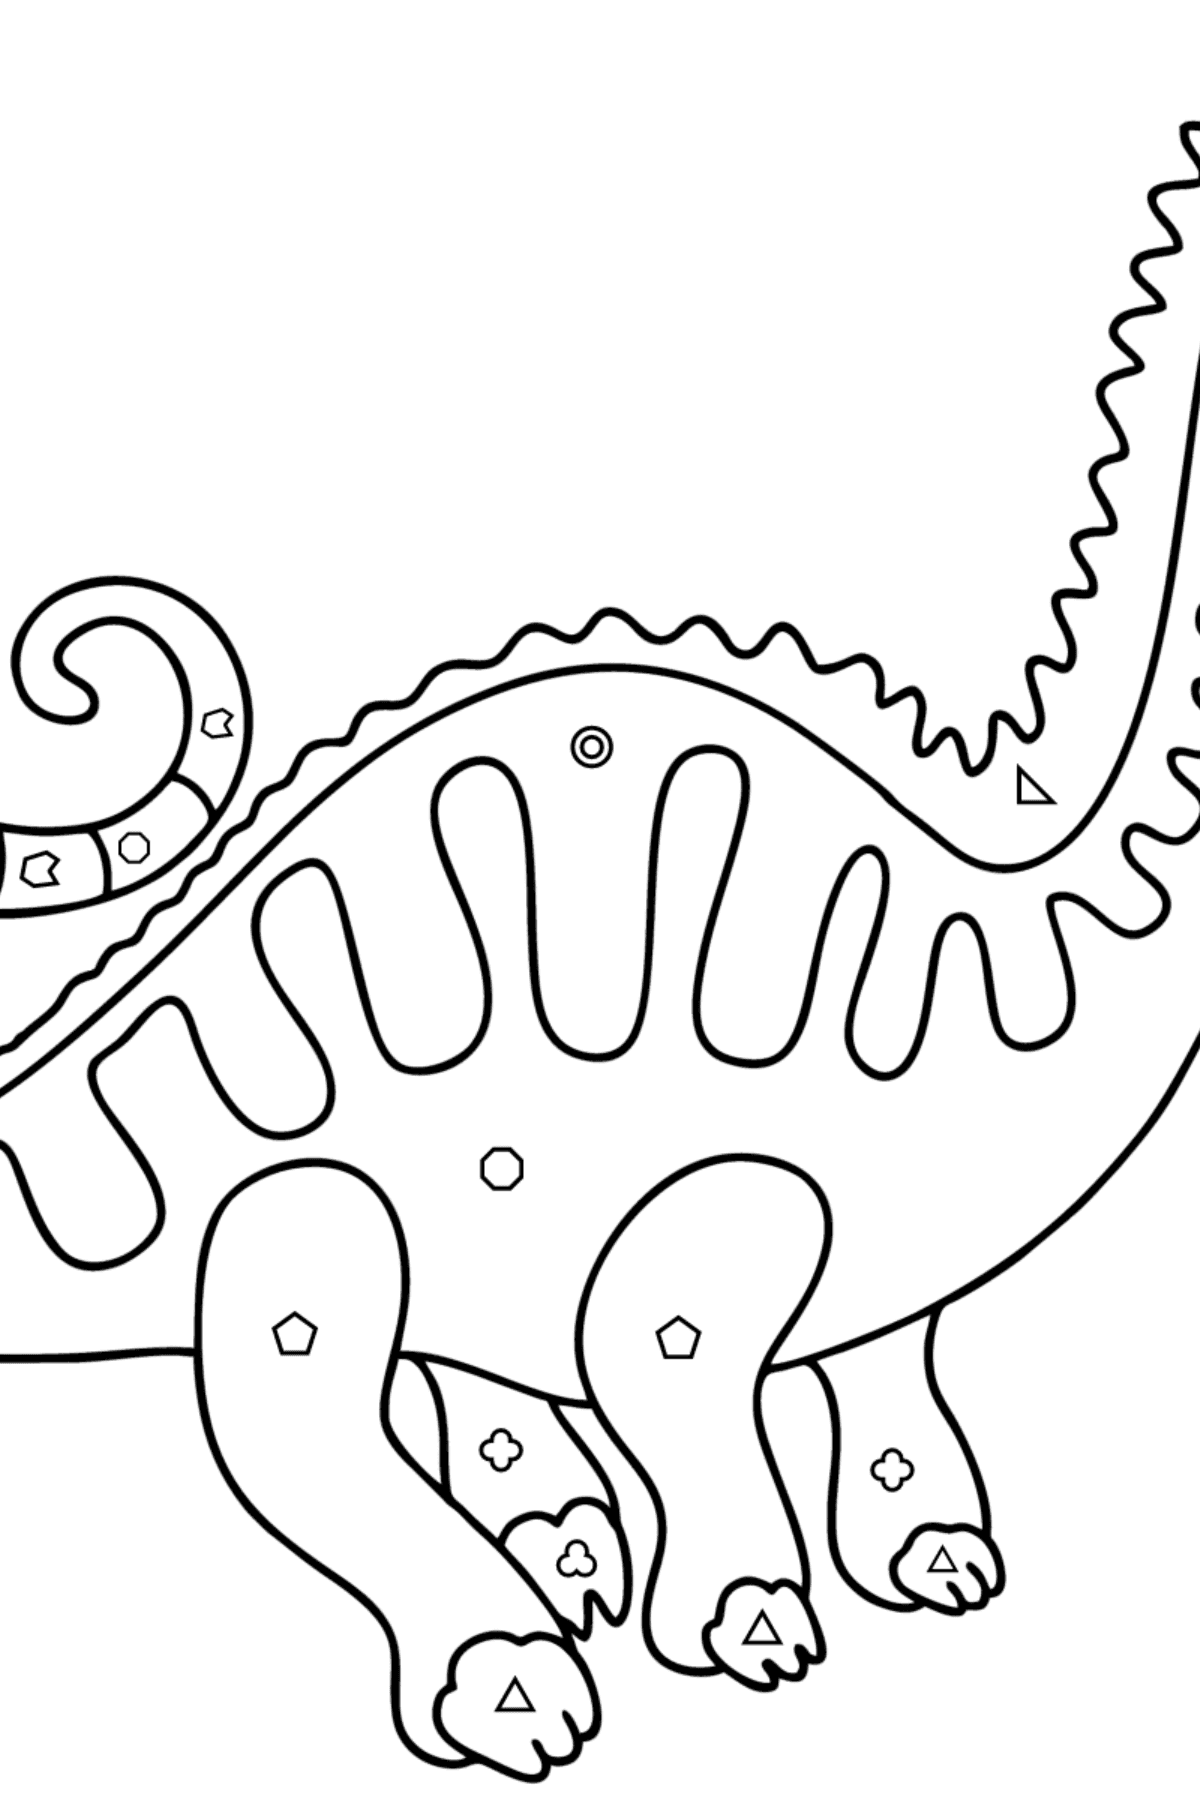 Apatosaurus coloring page - Coloring by Geometric Shapes for Kids